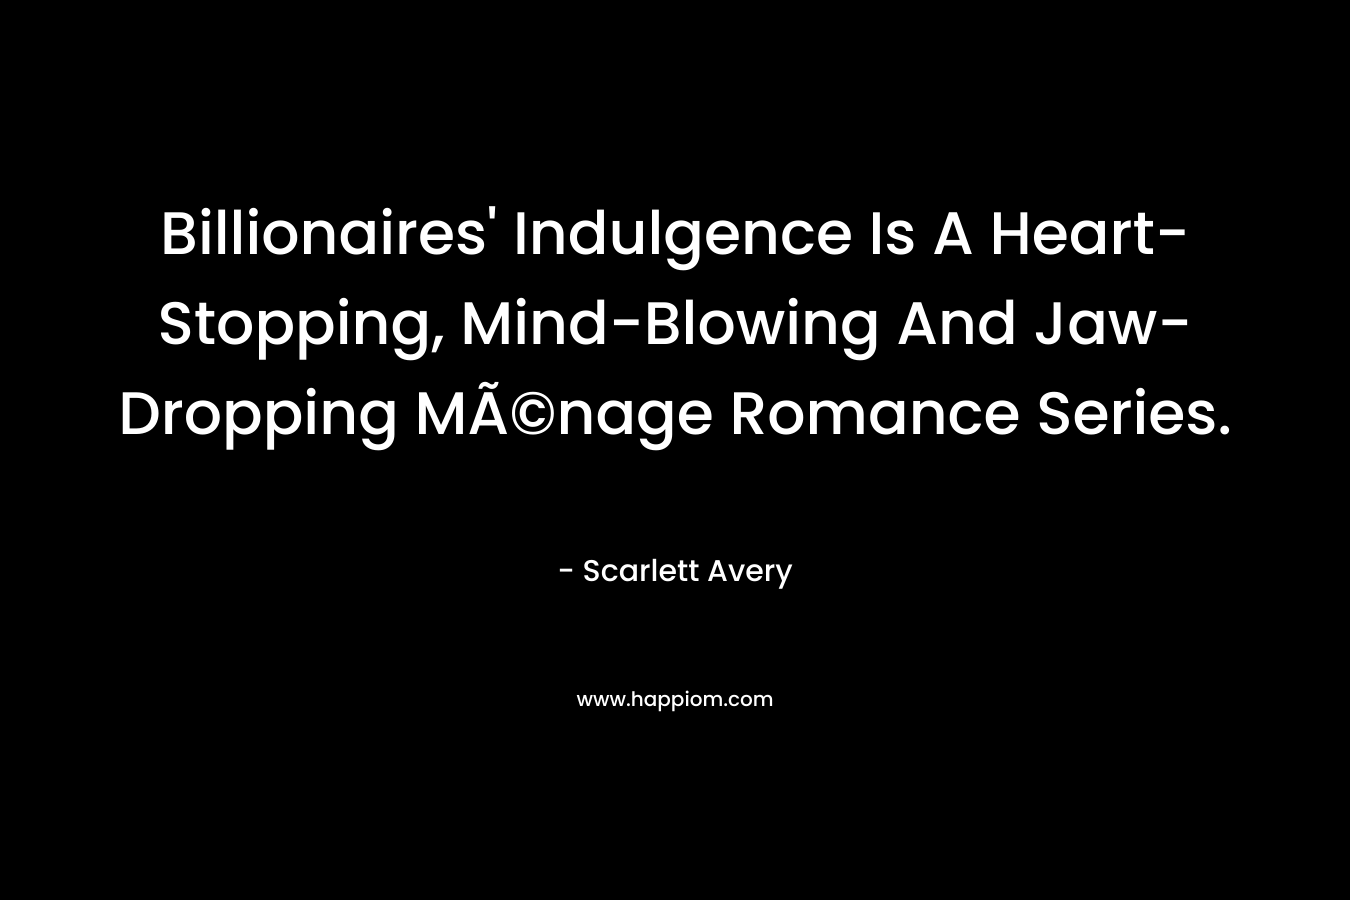 Billionaires' Indulgence Is A Heart-Stopping, Mind-Blowing And Jaw-Dropping MÃ©nage Romance Series.